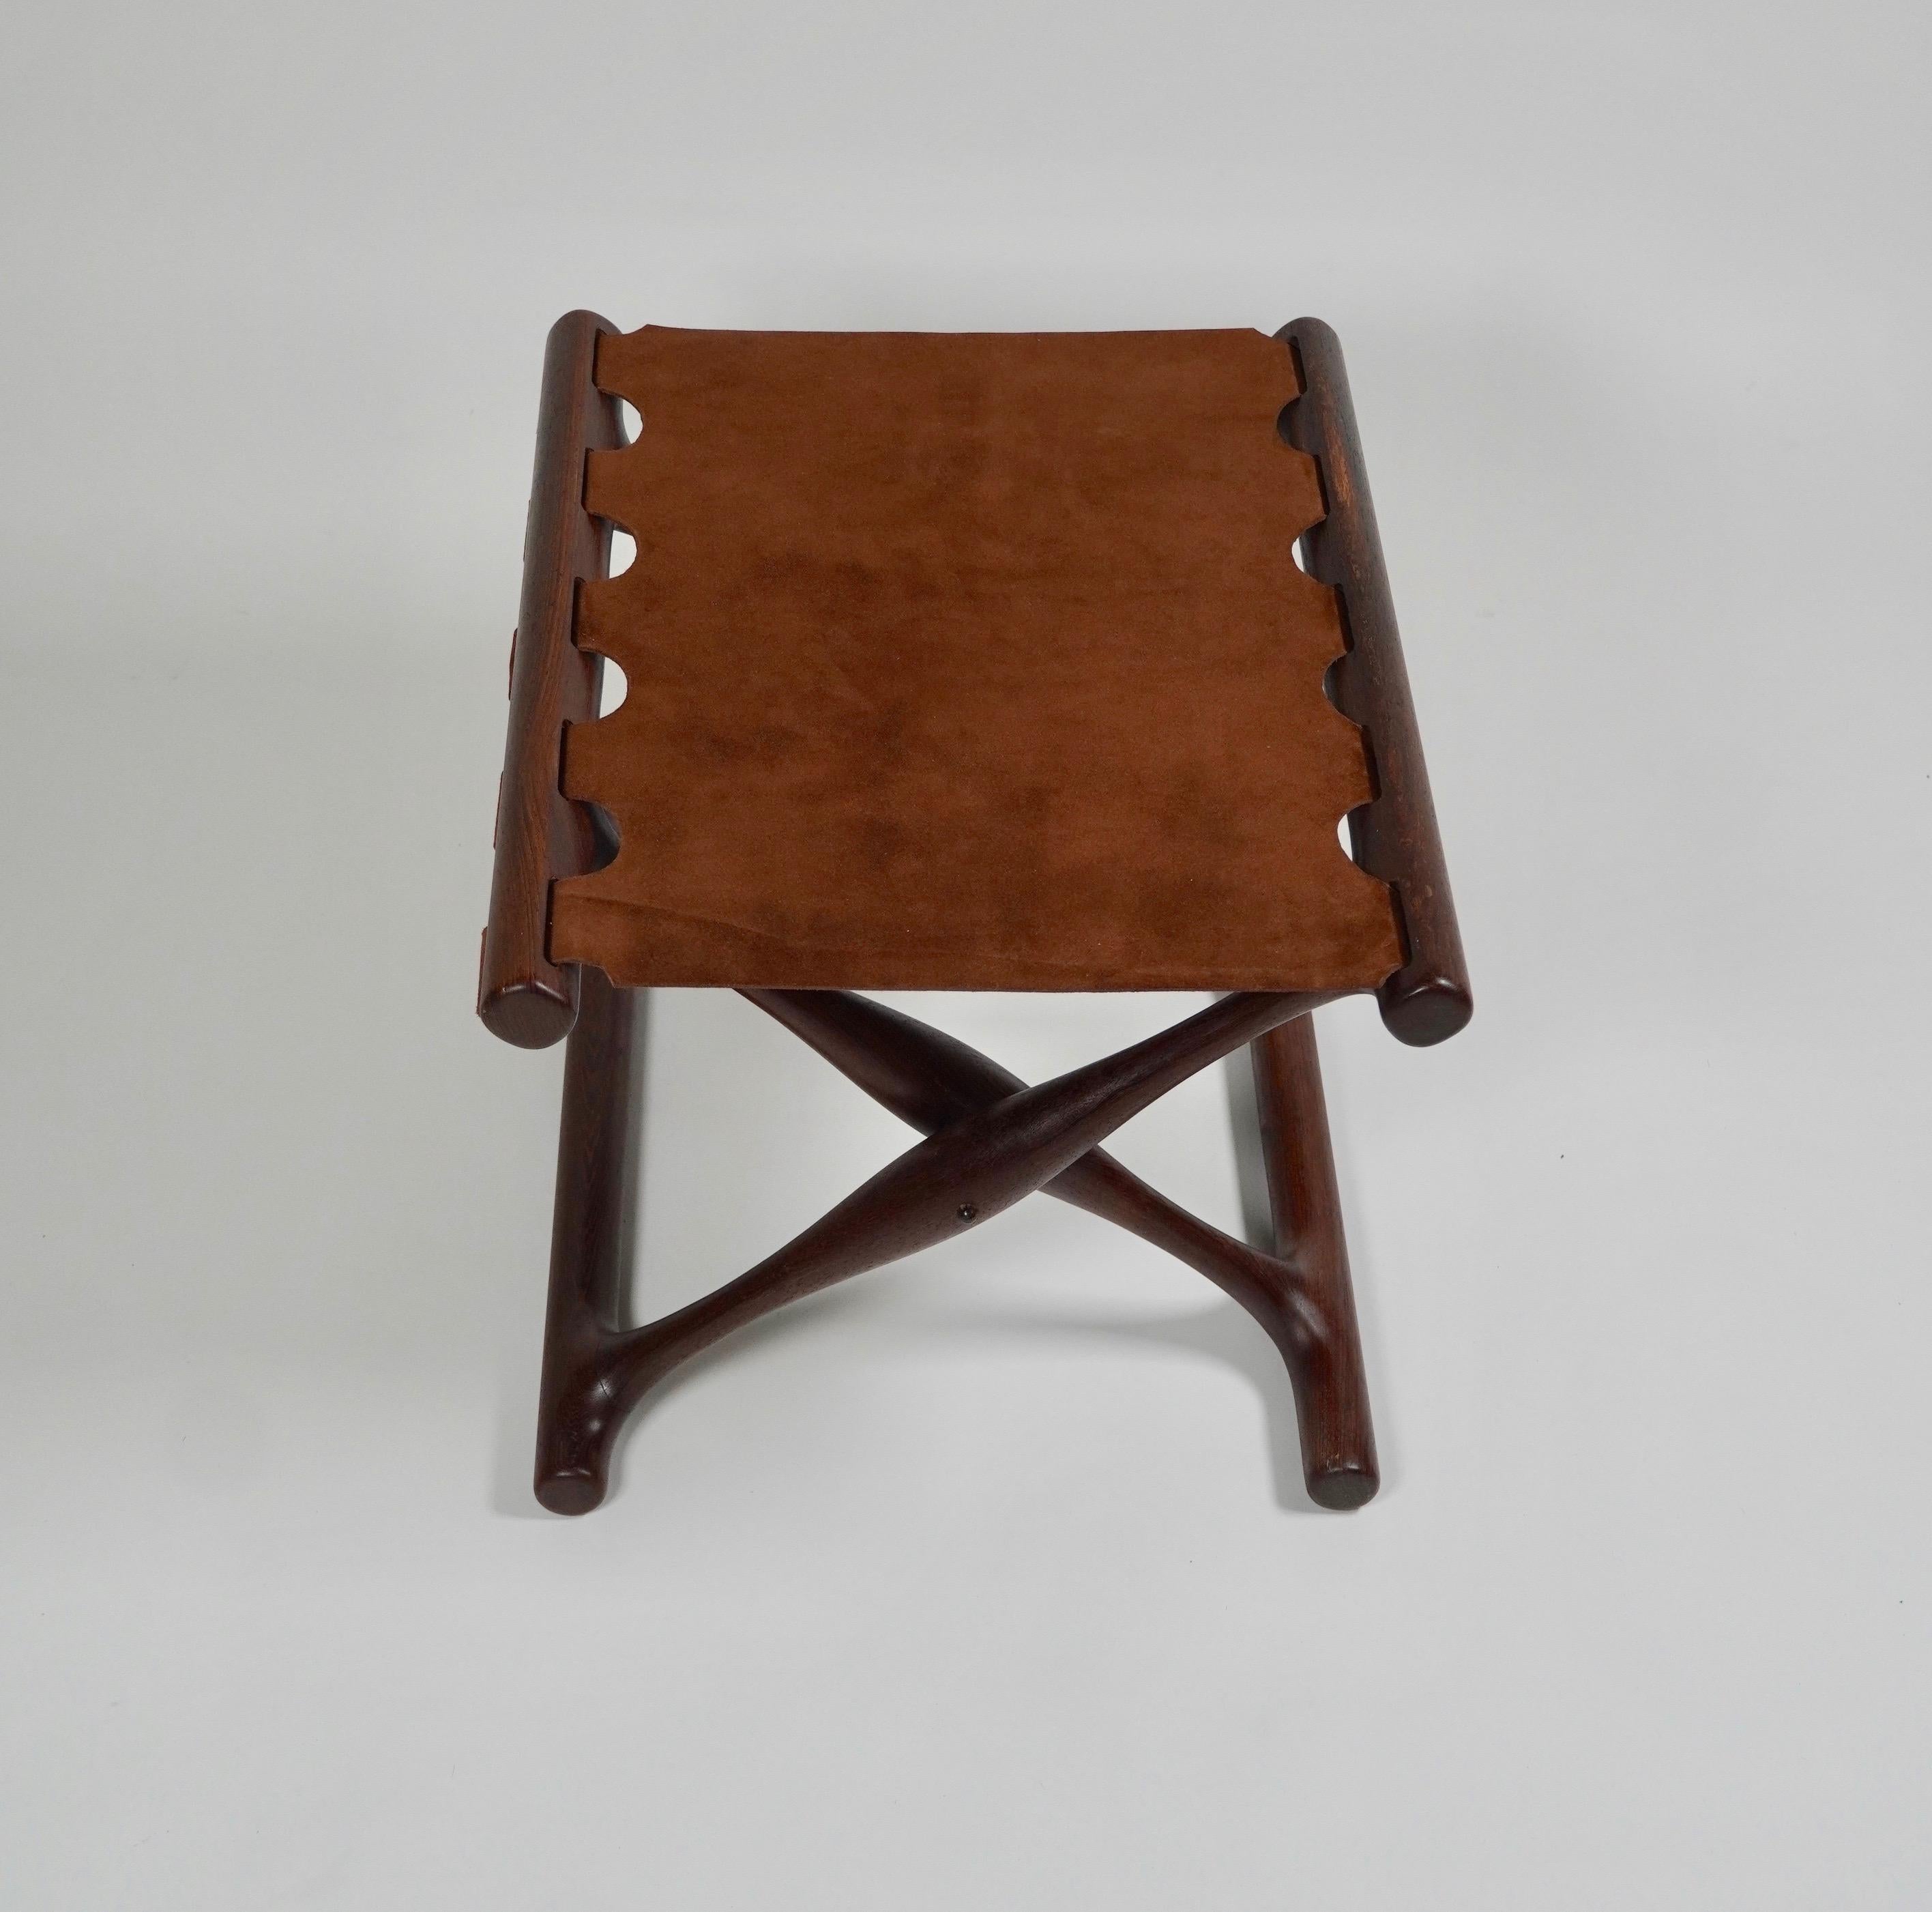 Danish Rare Woods African Wenge and Suede Poul Hundevad Folding Stool PH43 of Denmark